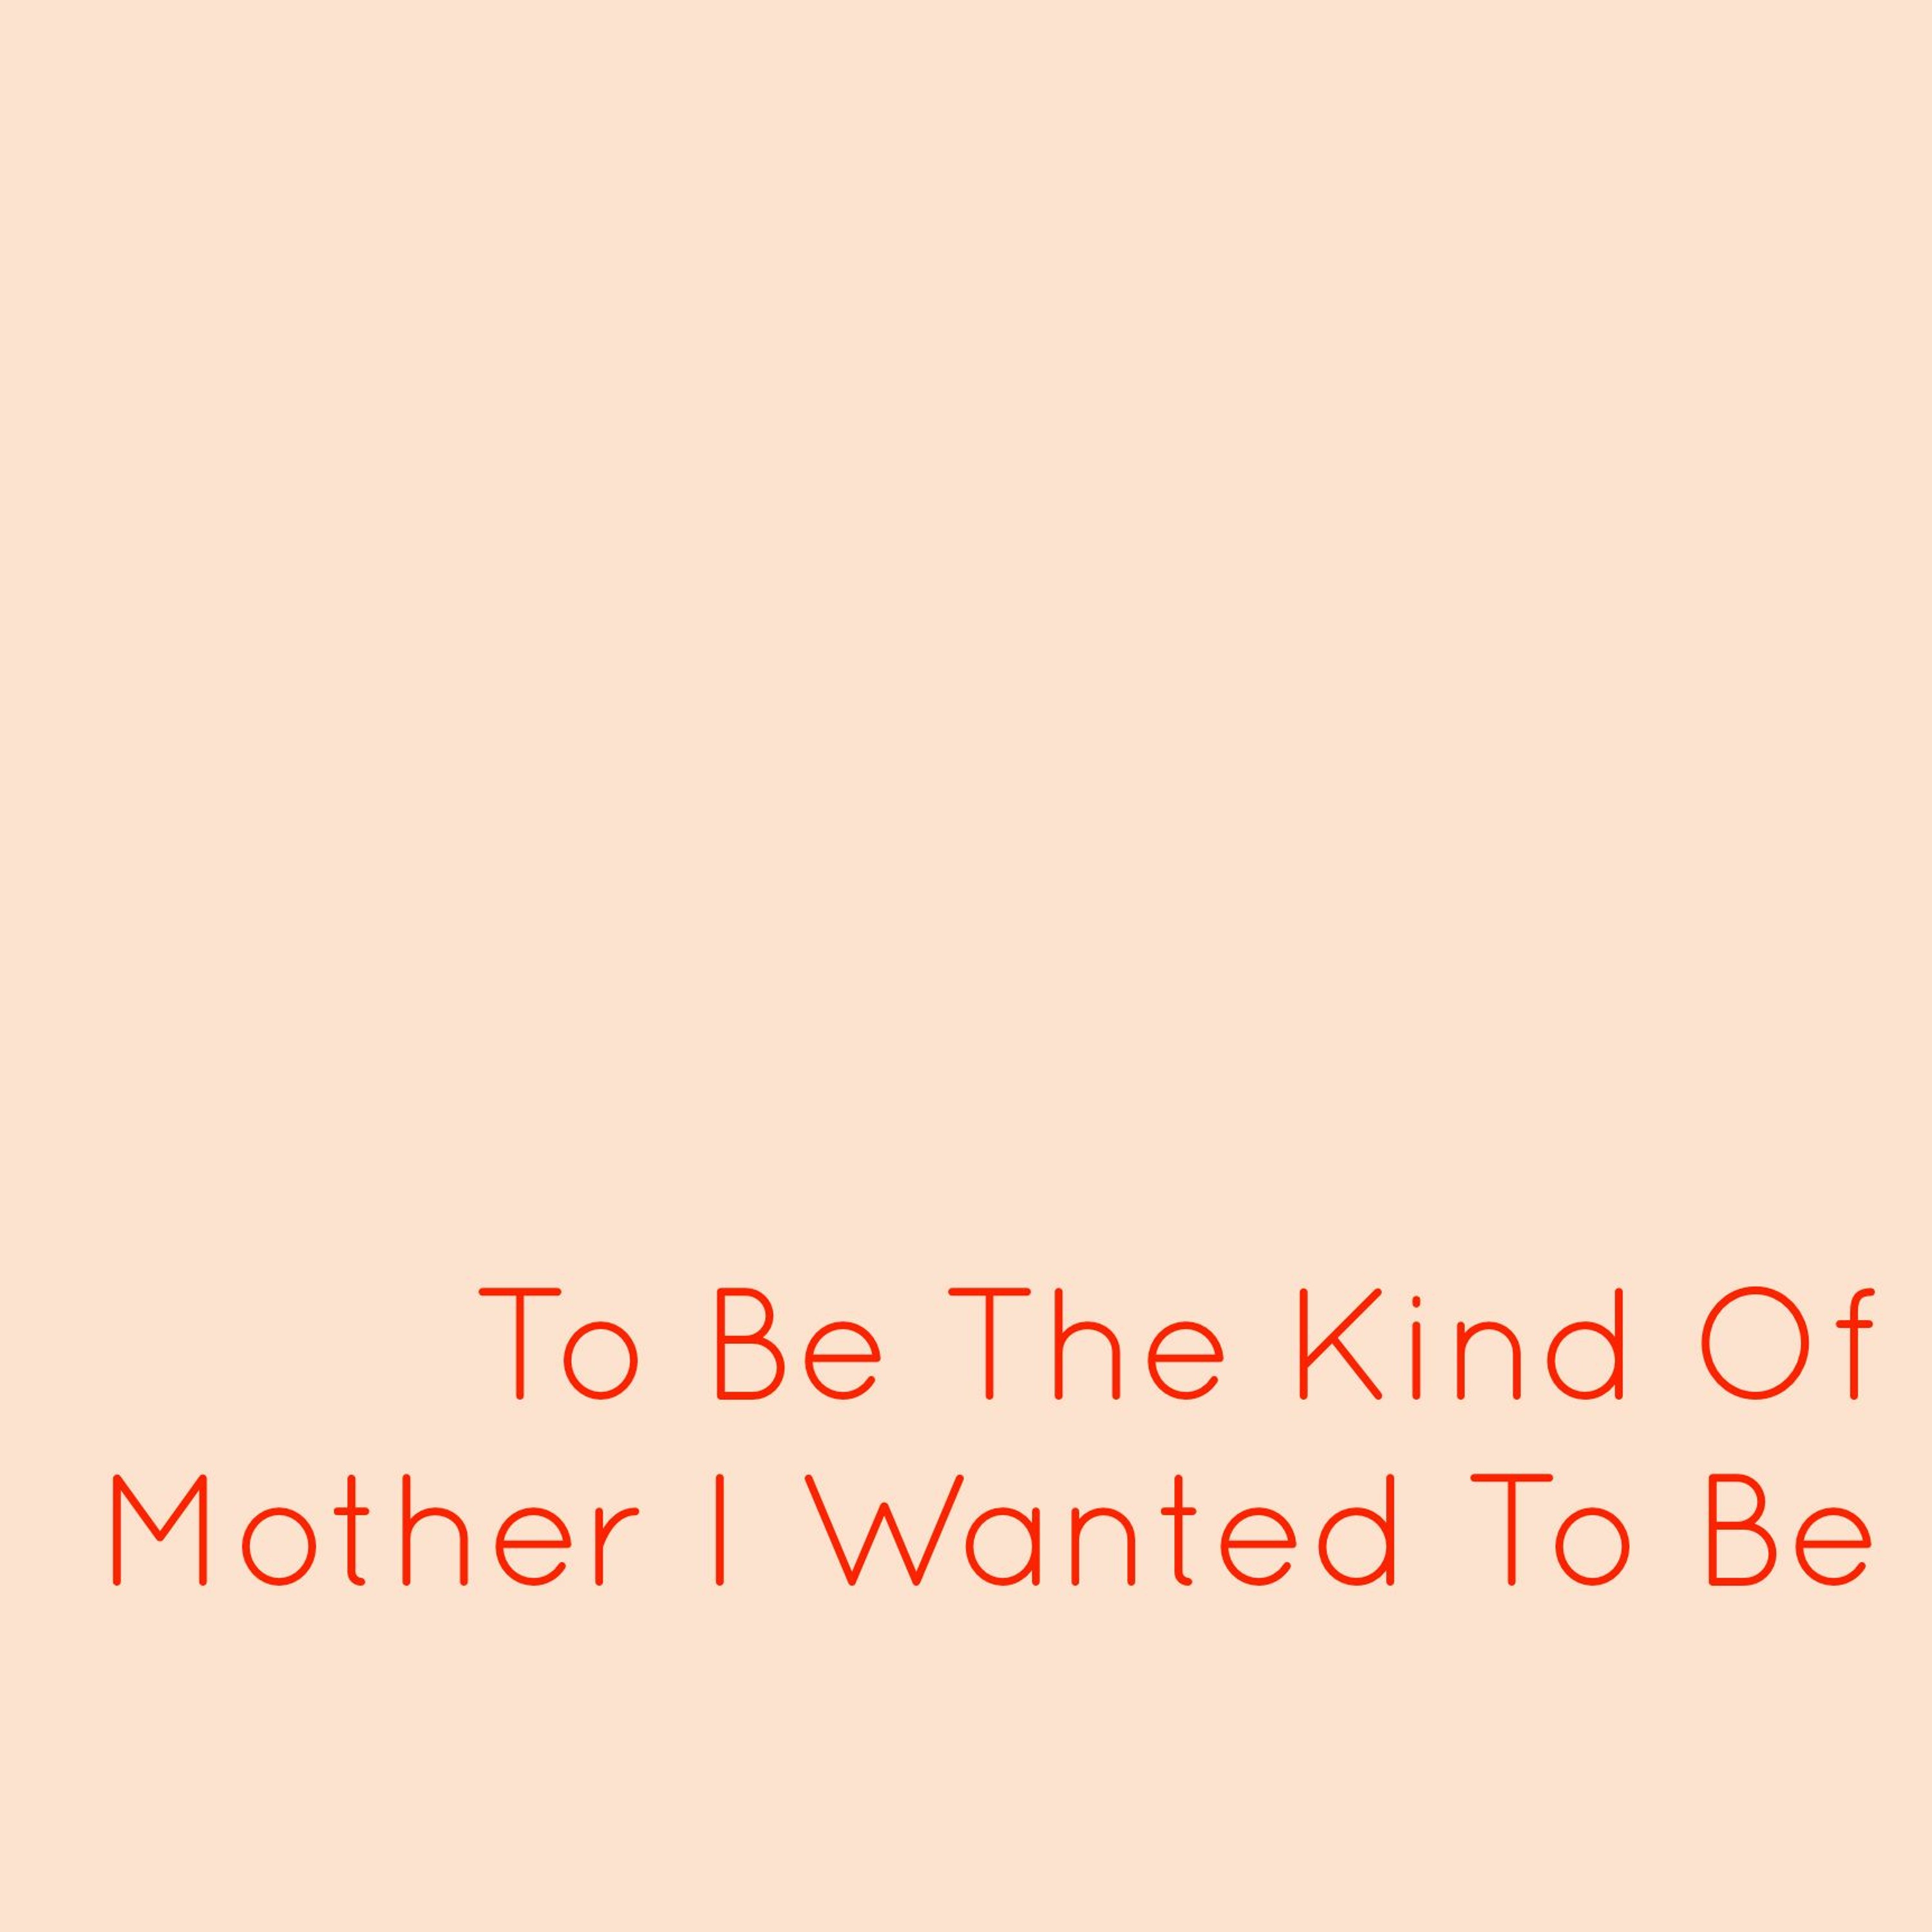 Ep 24: To Be The Kind of Mother I Wanted To Be